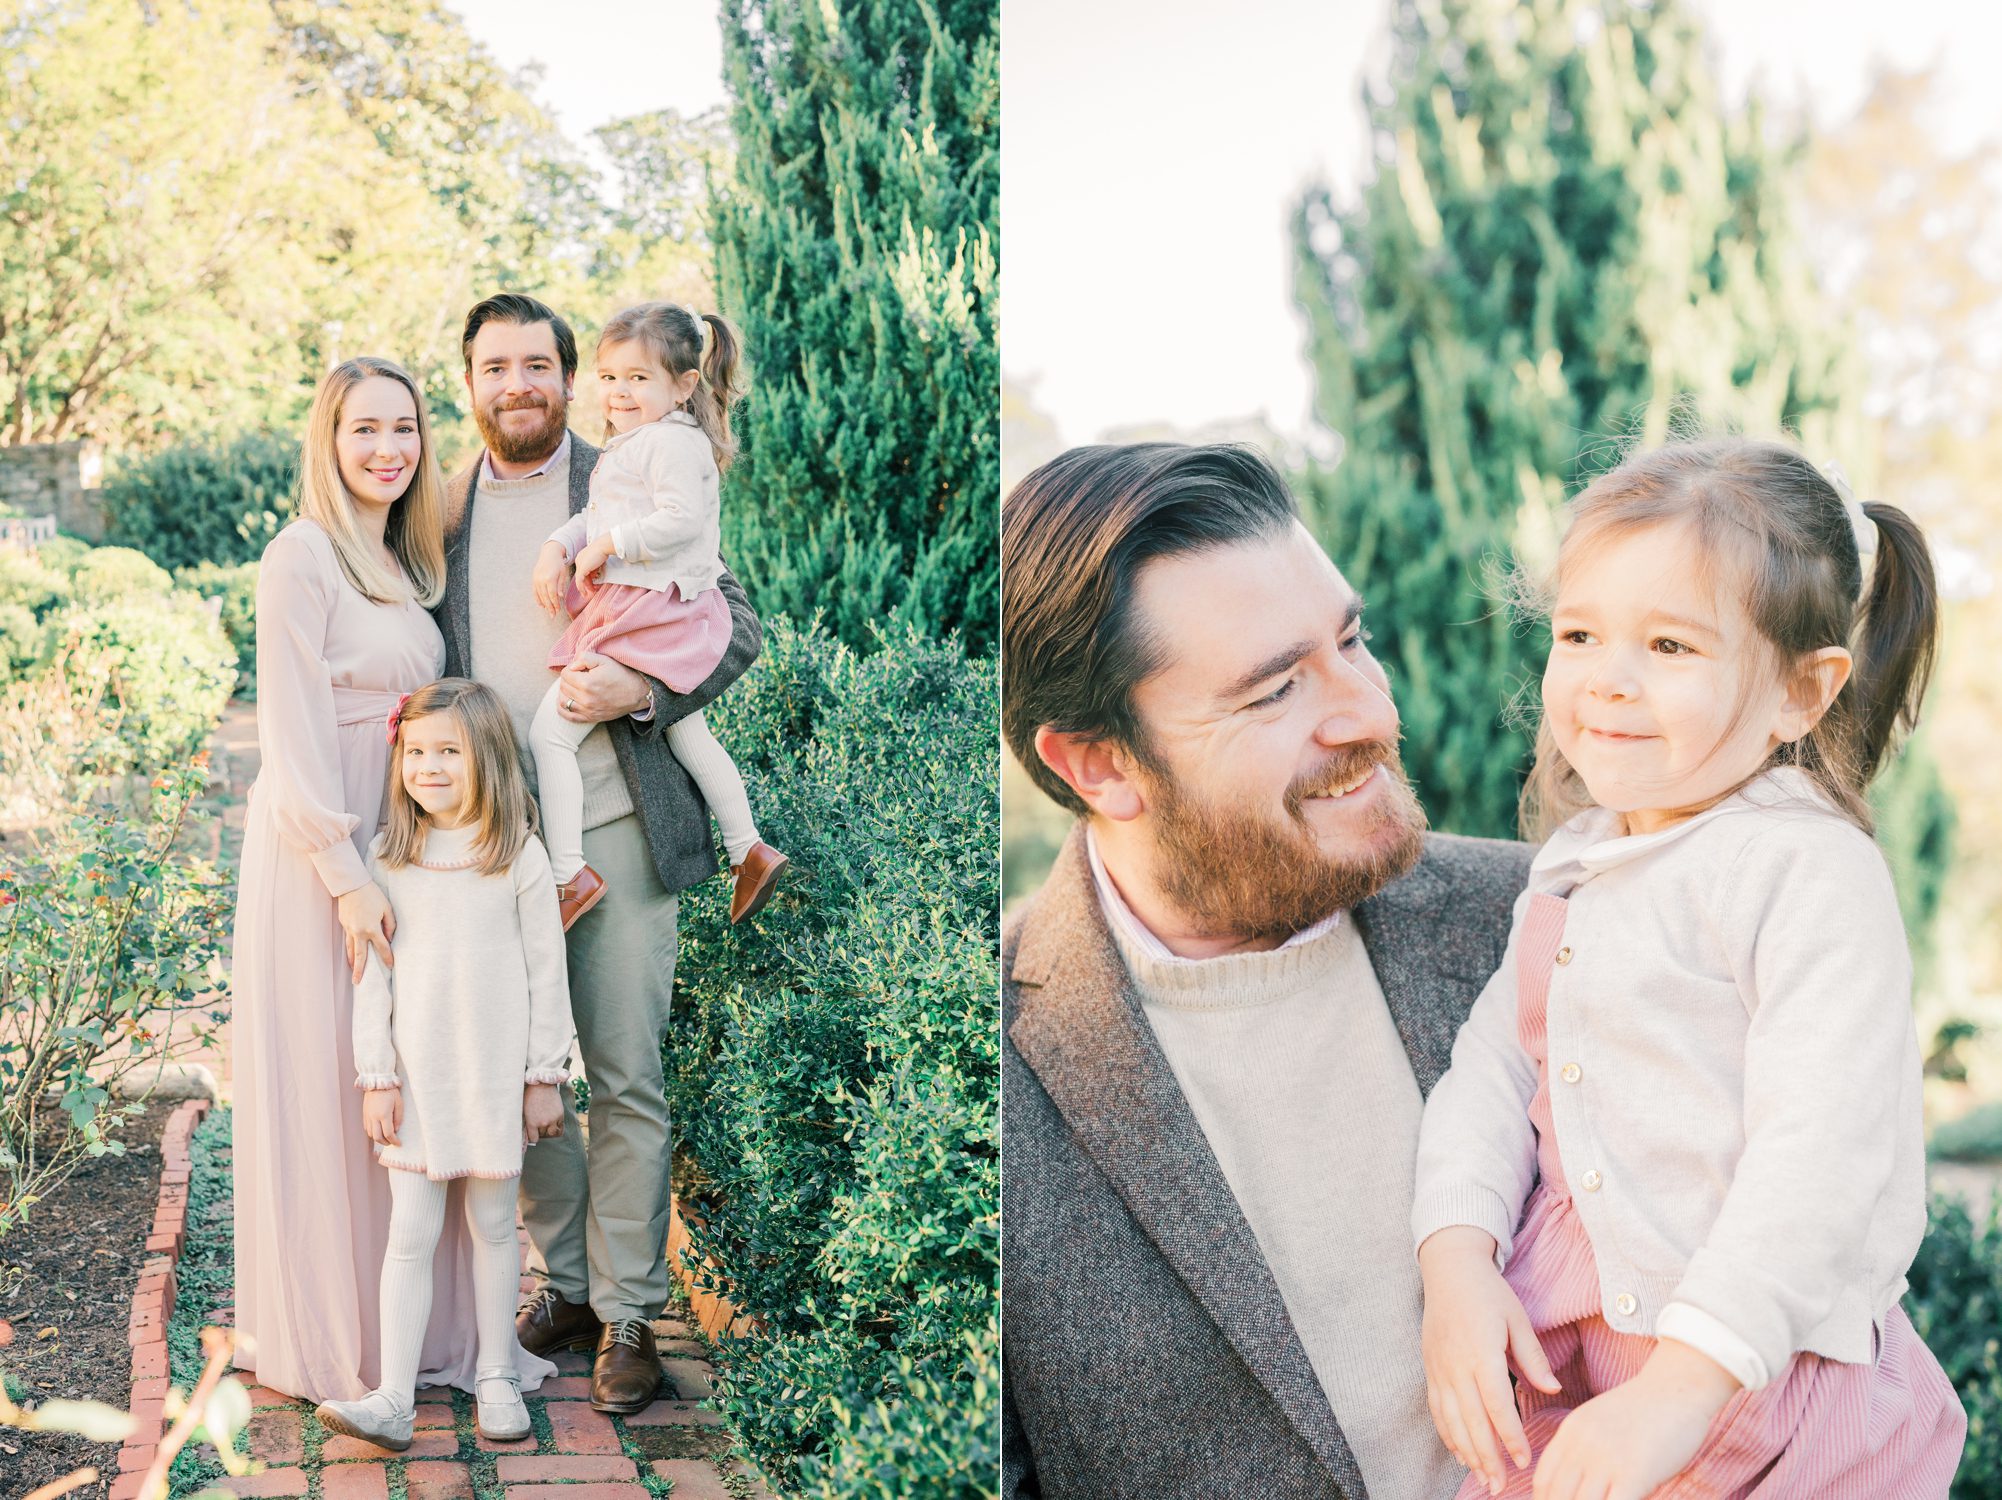 Family smiling together and Dad holding little girl in Washington DC family session. Photos by LRG Portraits.